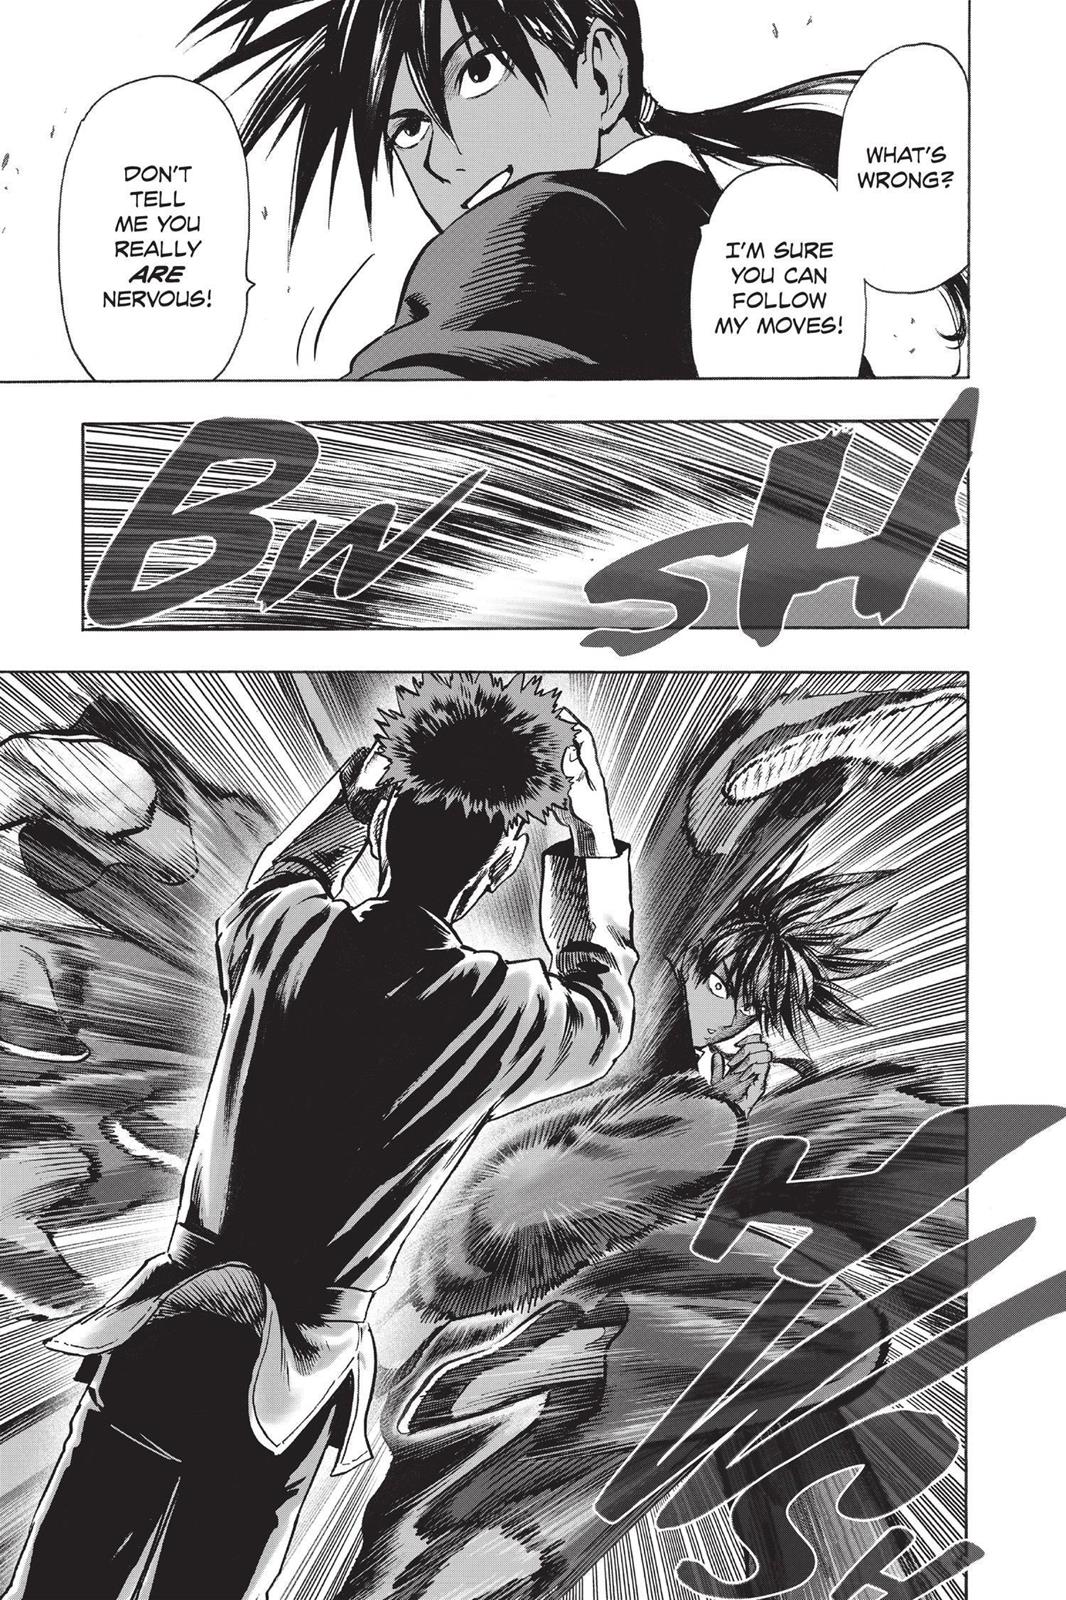 One-Punch Man, Punch 70 image 13